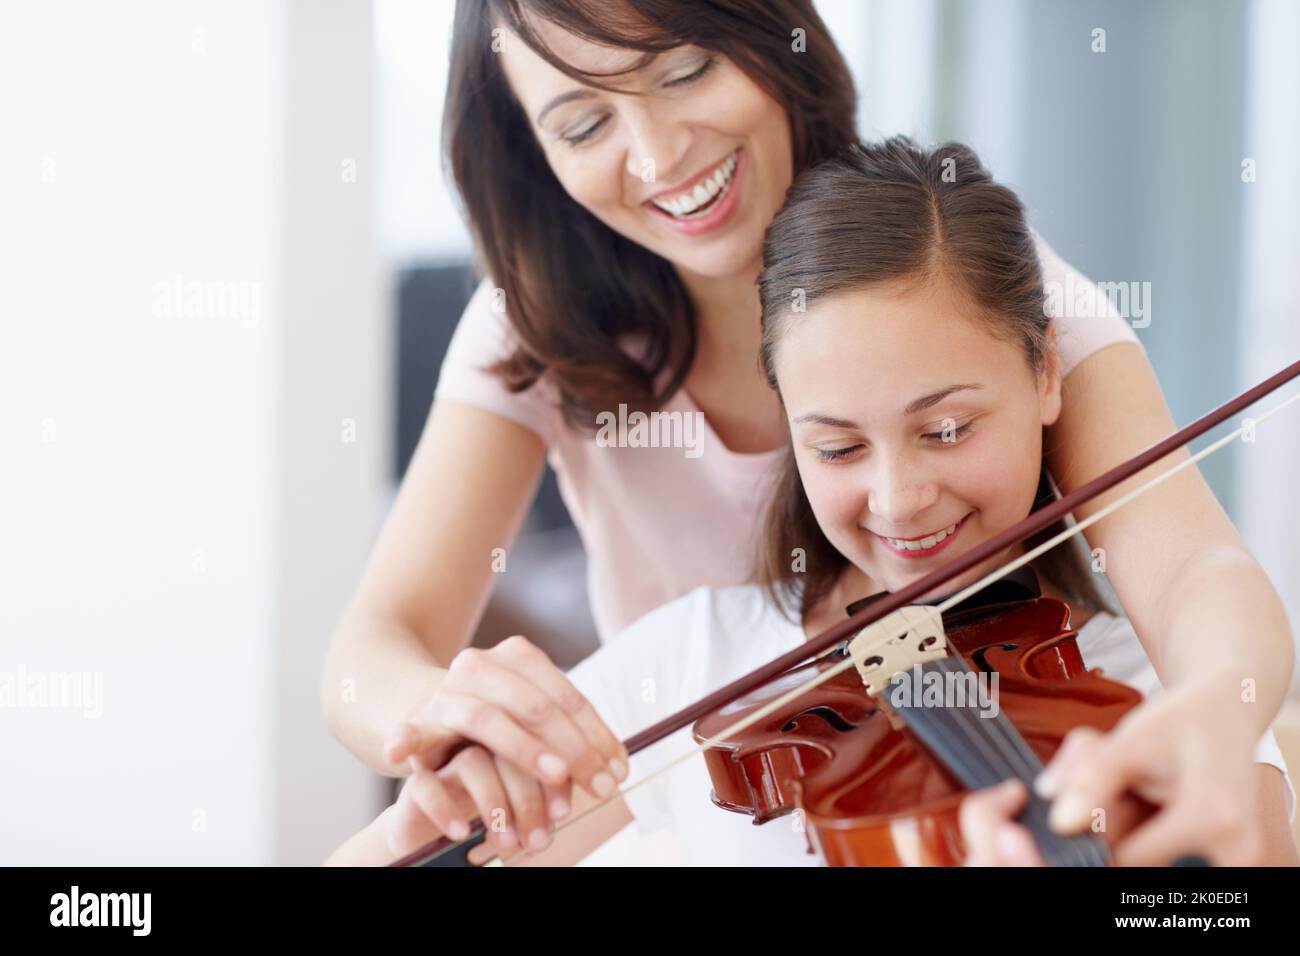 Making sweet melody together - Bonding. A mother helping her daughter practice the violin - Copyspace. Stock Photo